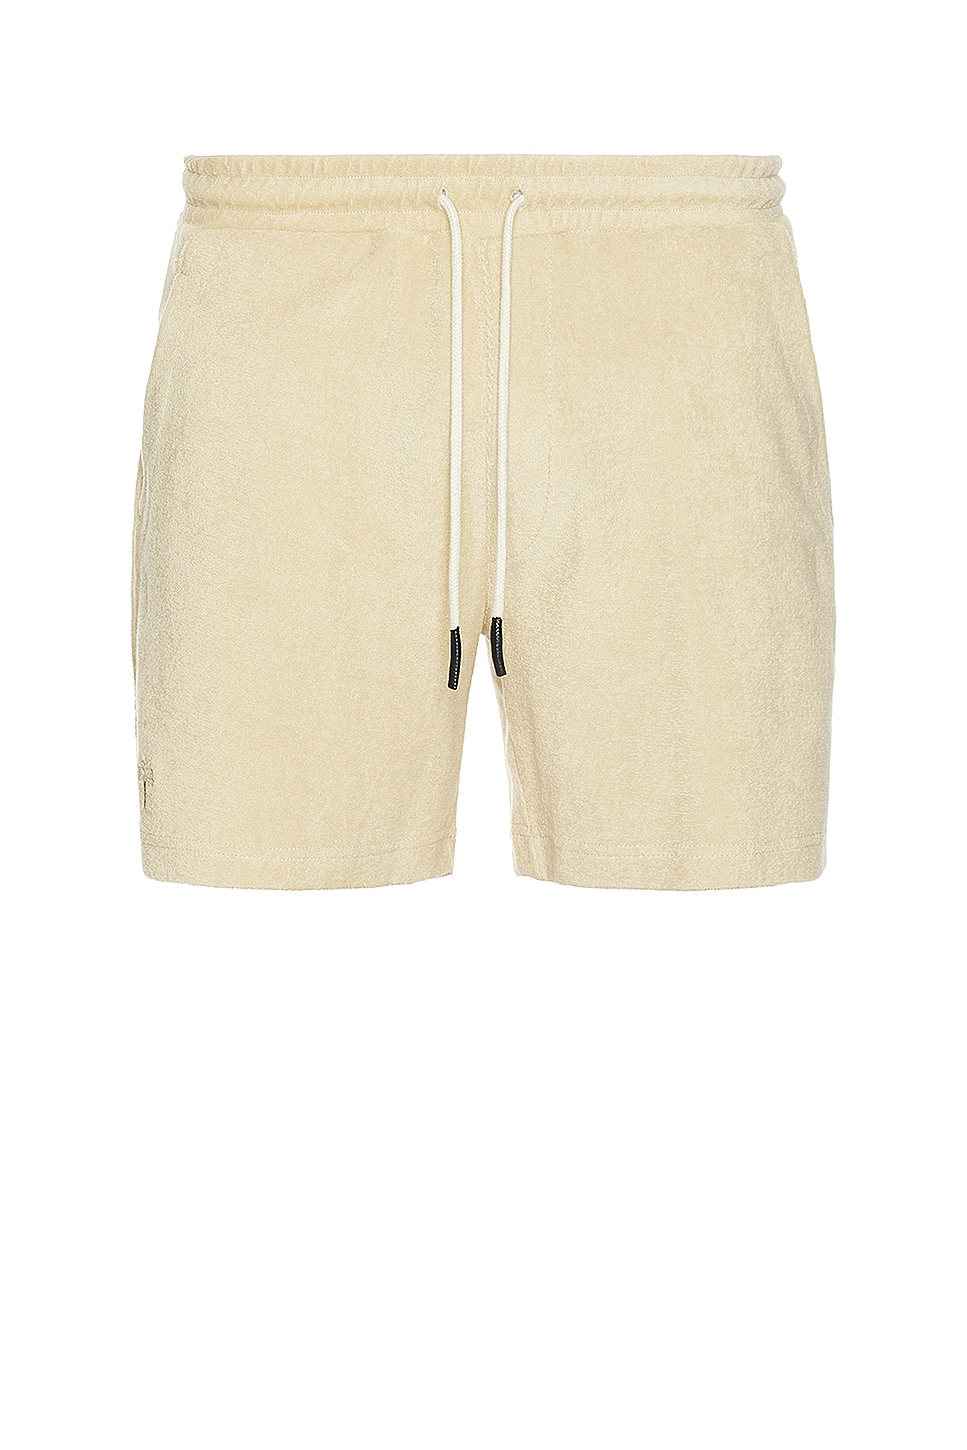 Image 1 of OAS Terry Shorts in Beige